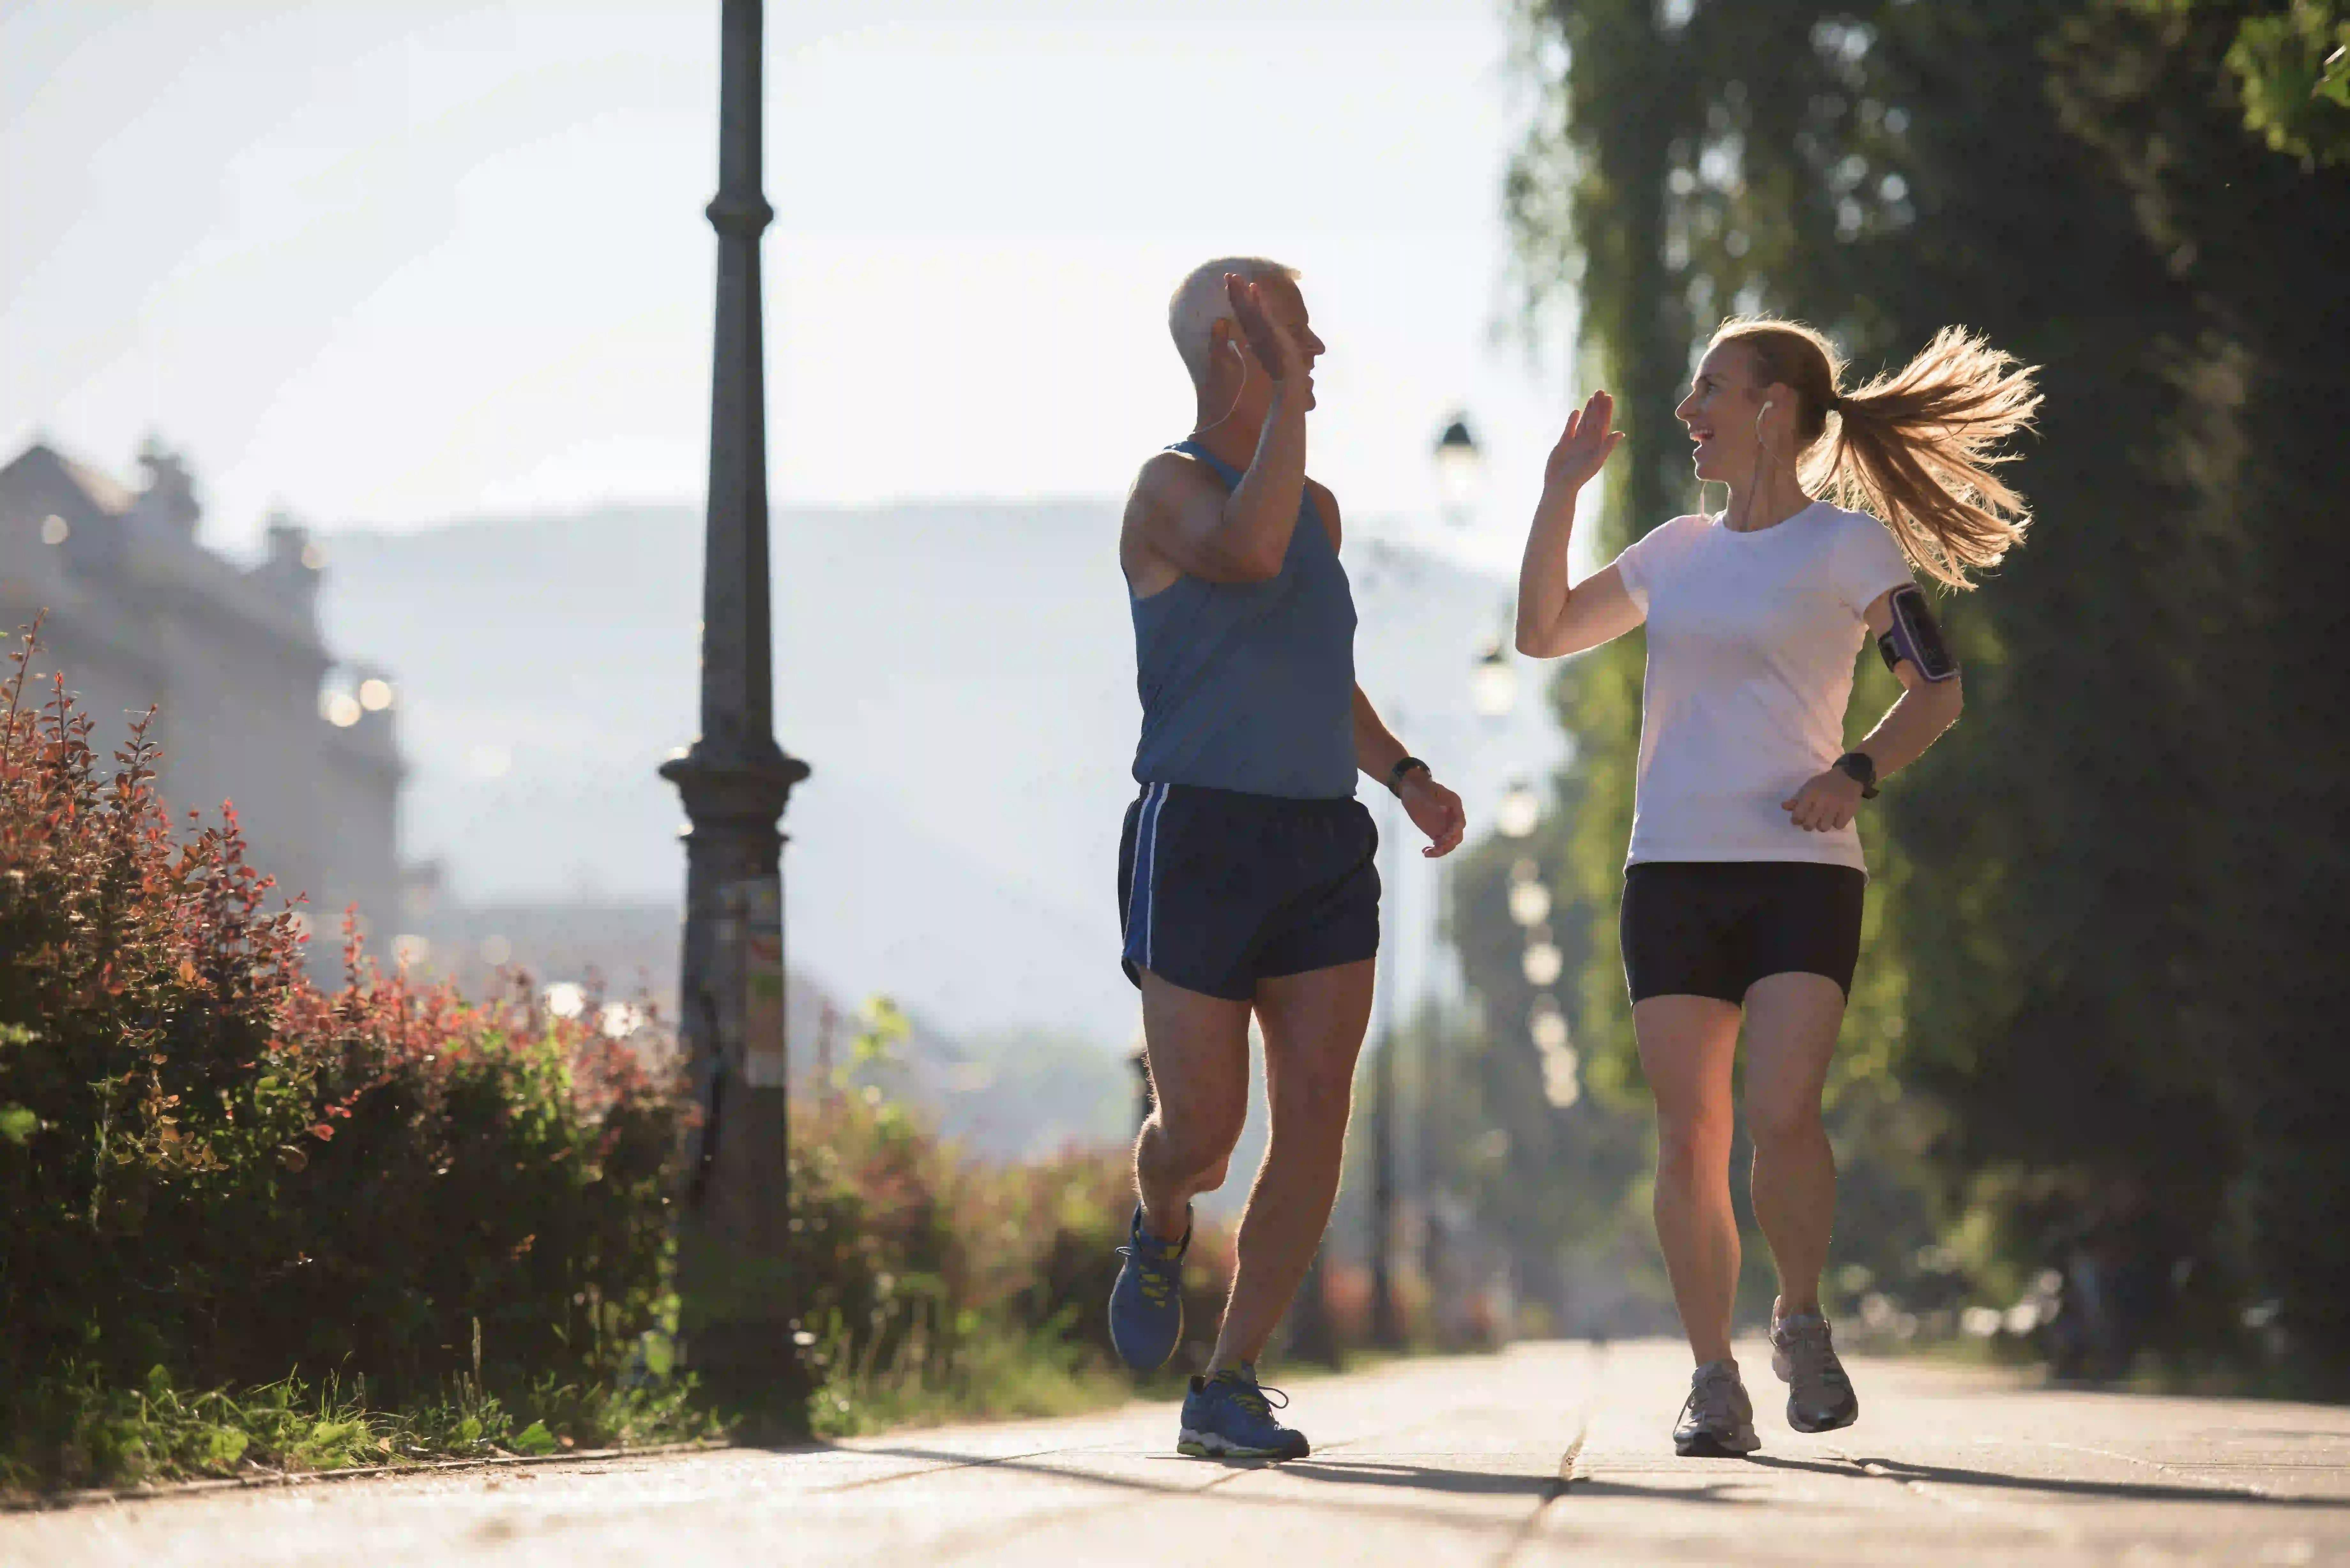 Man and woman high-fiving while jogging